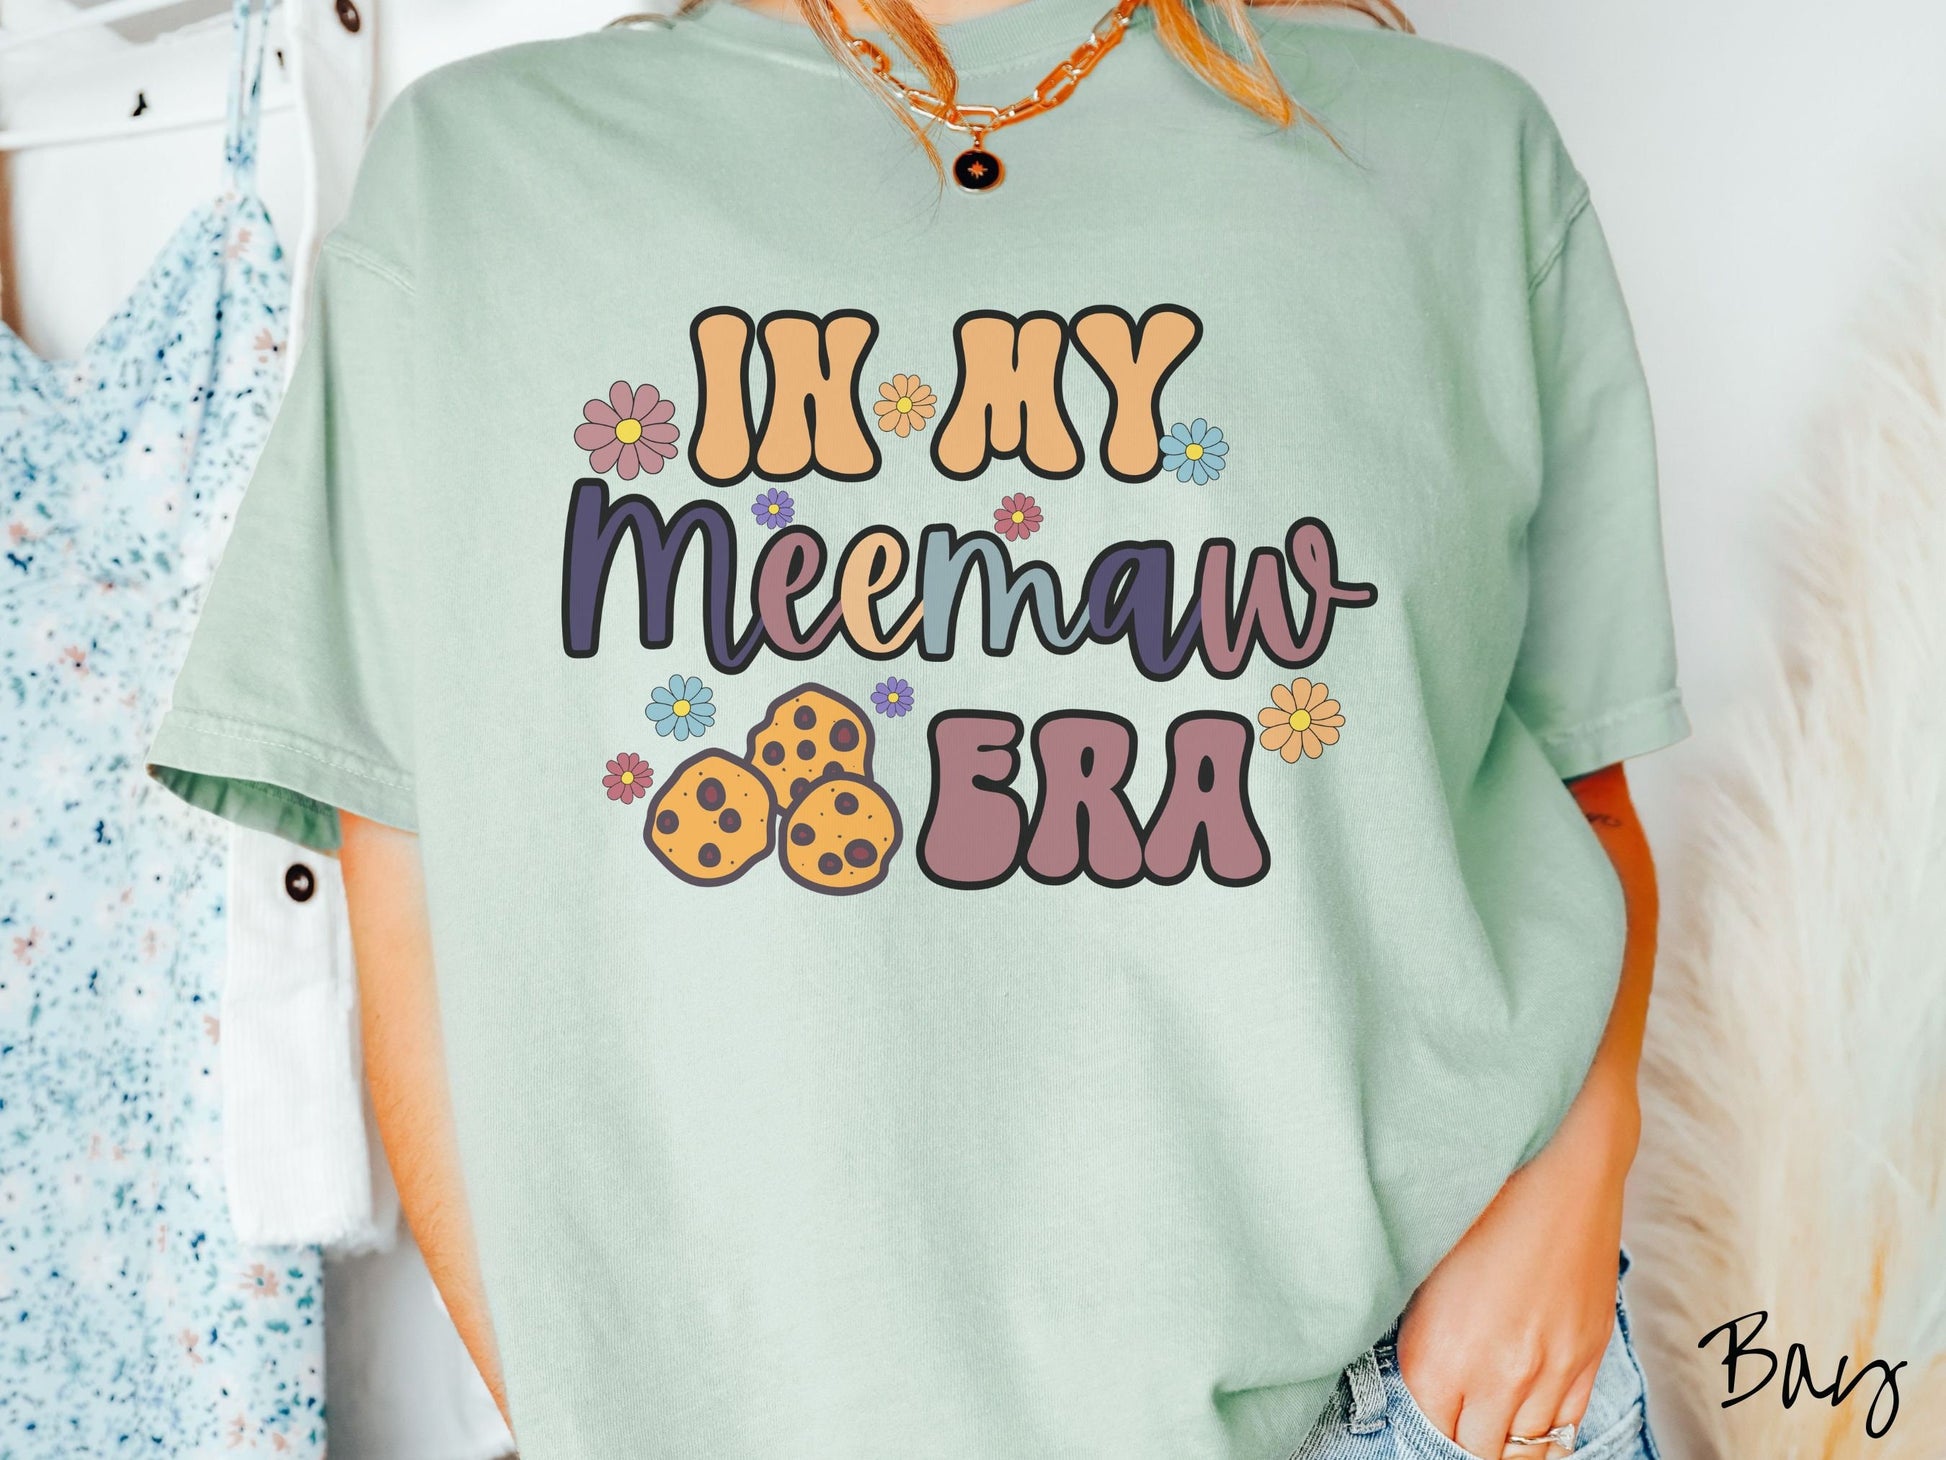 A woman wearing a cute bay colored sweatshirt with text on the front saying In My Meemaw Era, with flowers and chocolate chip cookies mixed within the text.